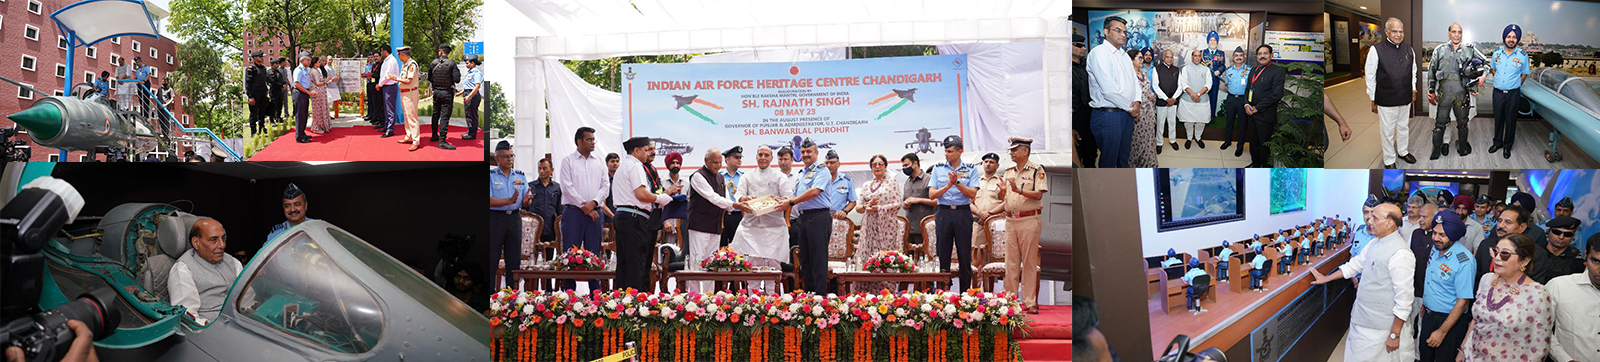 Chandigarh’s IAF Heritage Centre Inaugurated, Open for Public Now